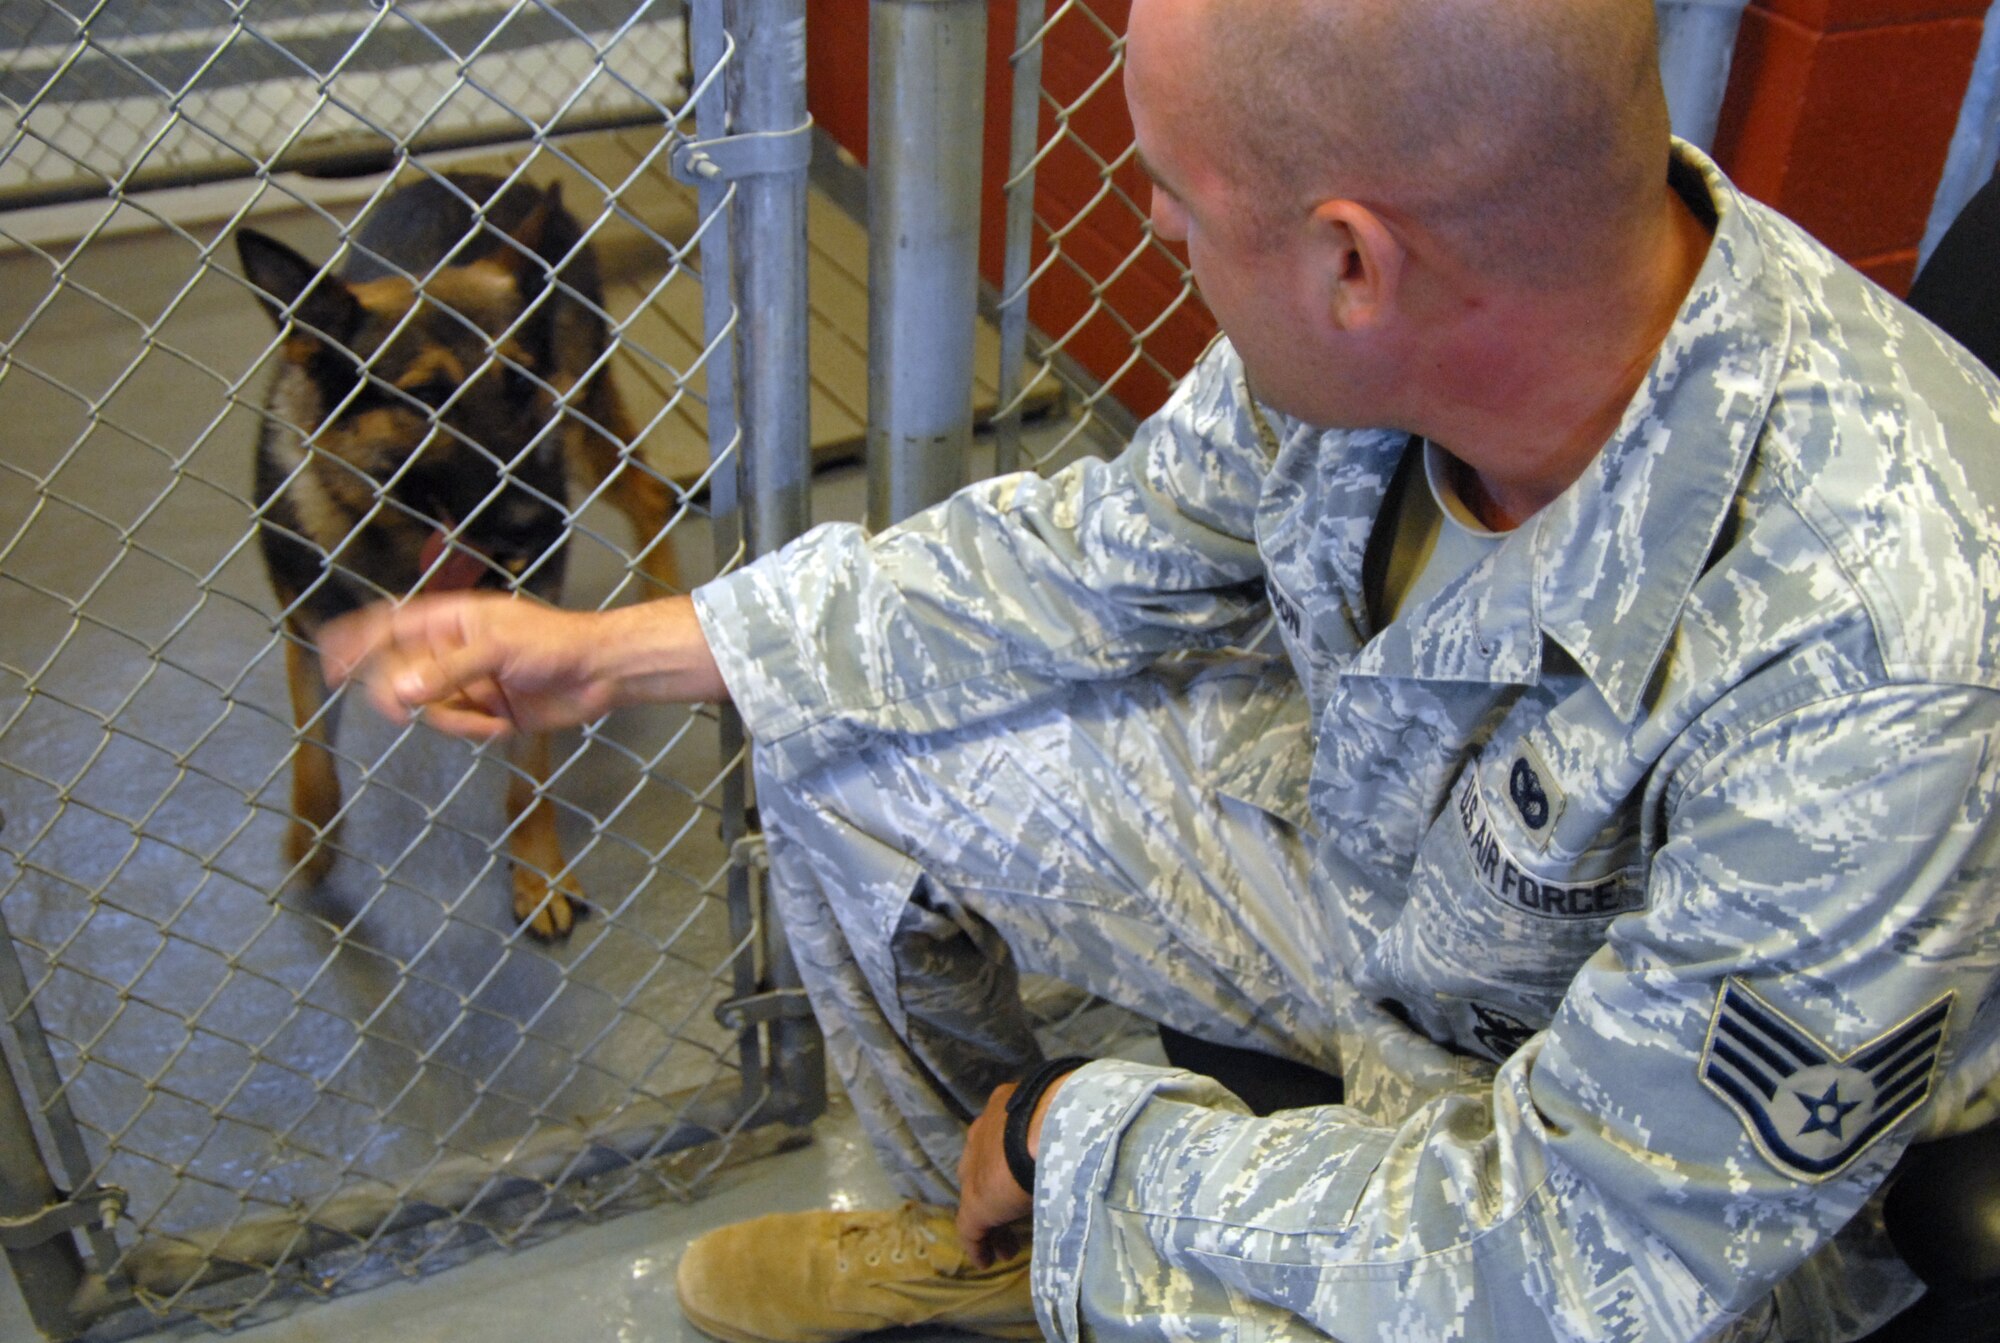 Staff Sgt. Eric Magnuson, 95th Security Forces Squadron Military Working Dog handler, talks to Nix as part of their bonding. The bond between handler and dog is crucial for training and eventually, deployment. (U.S. Air Force photo/Senior Airman Julius Delos Reyes)